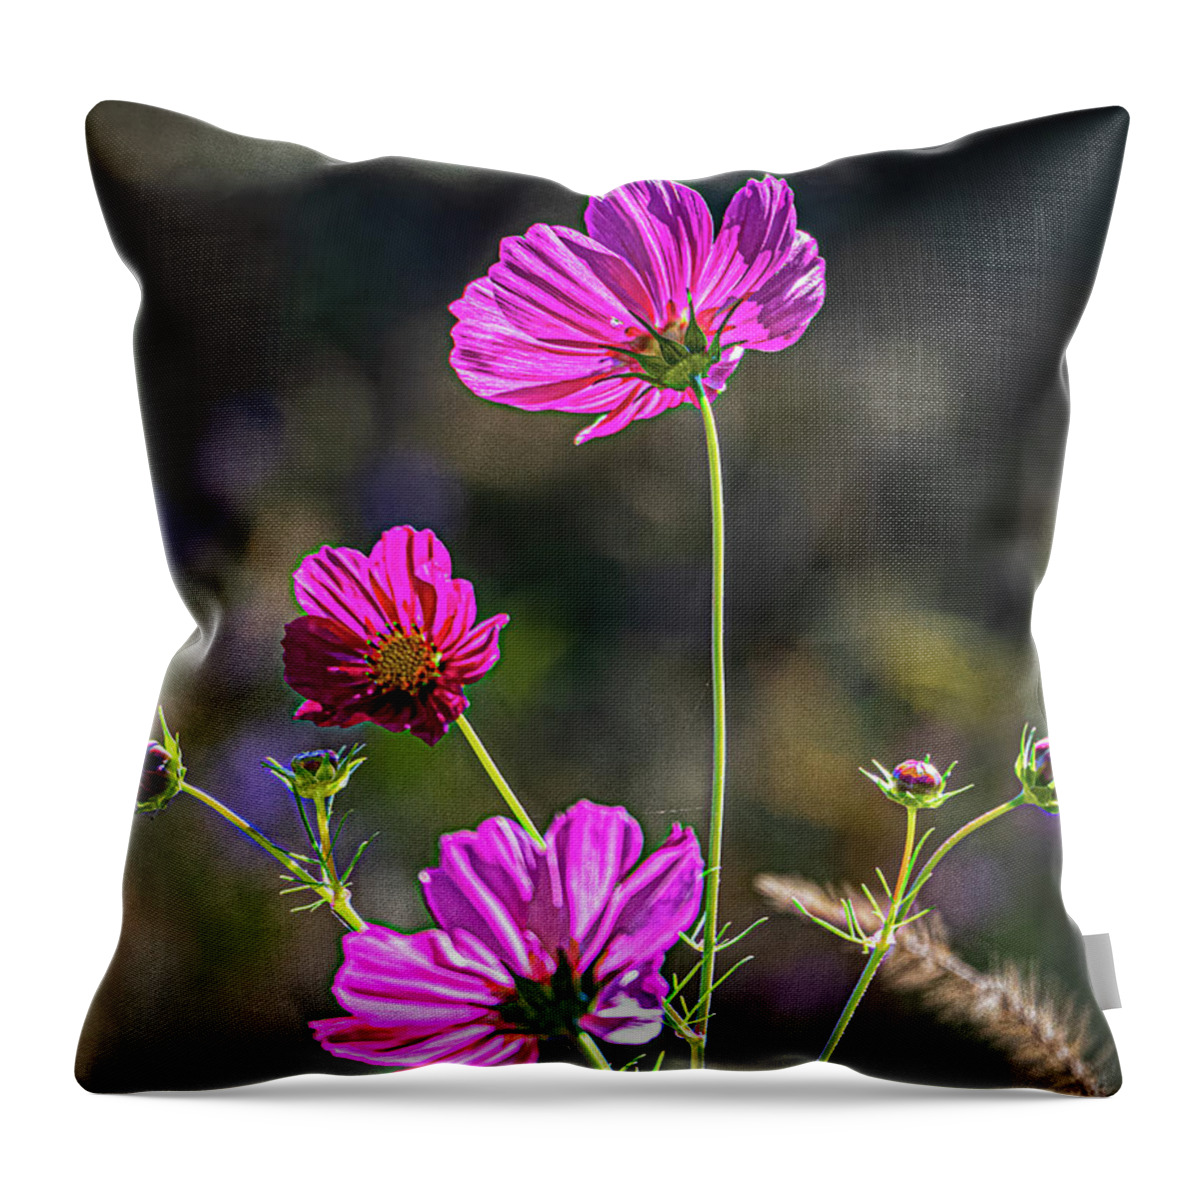 Autumn Throw Pillow featuring the photograph Cosmos by Thomas Marchessault